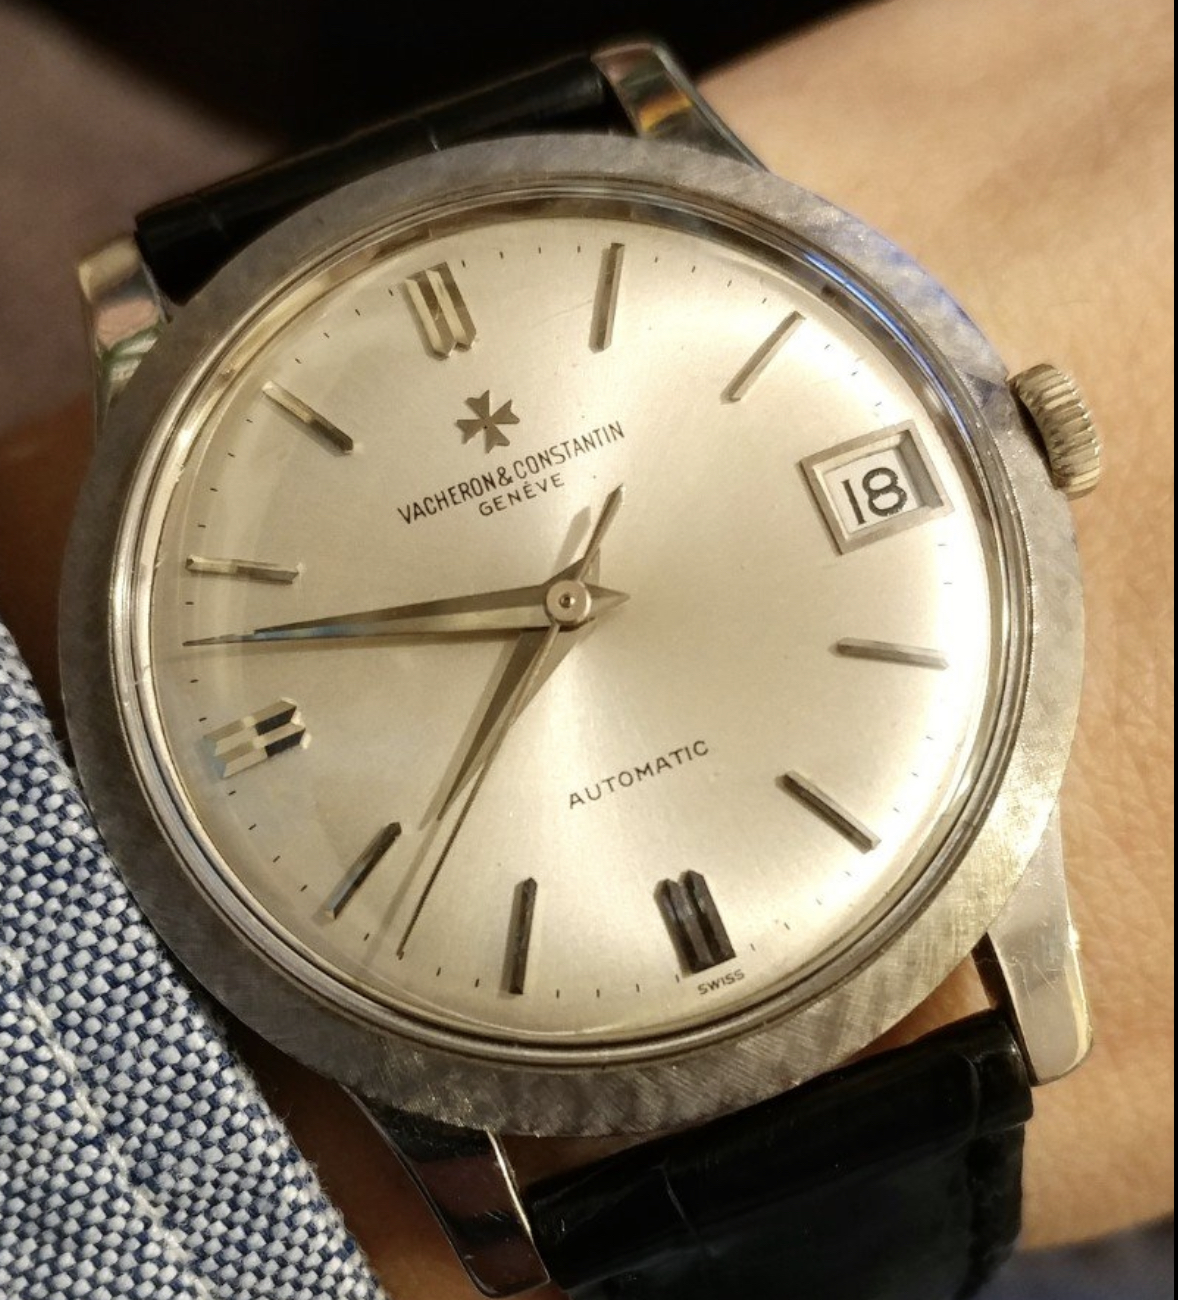 Vintage watch experience 古董手錶: 2020 Q3-4 Wish lists